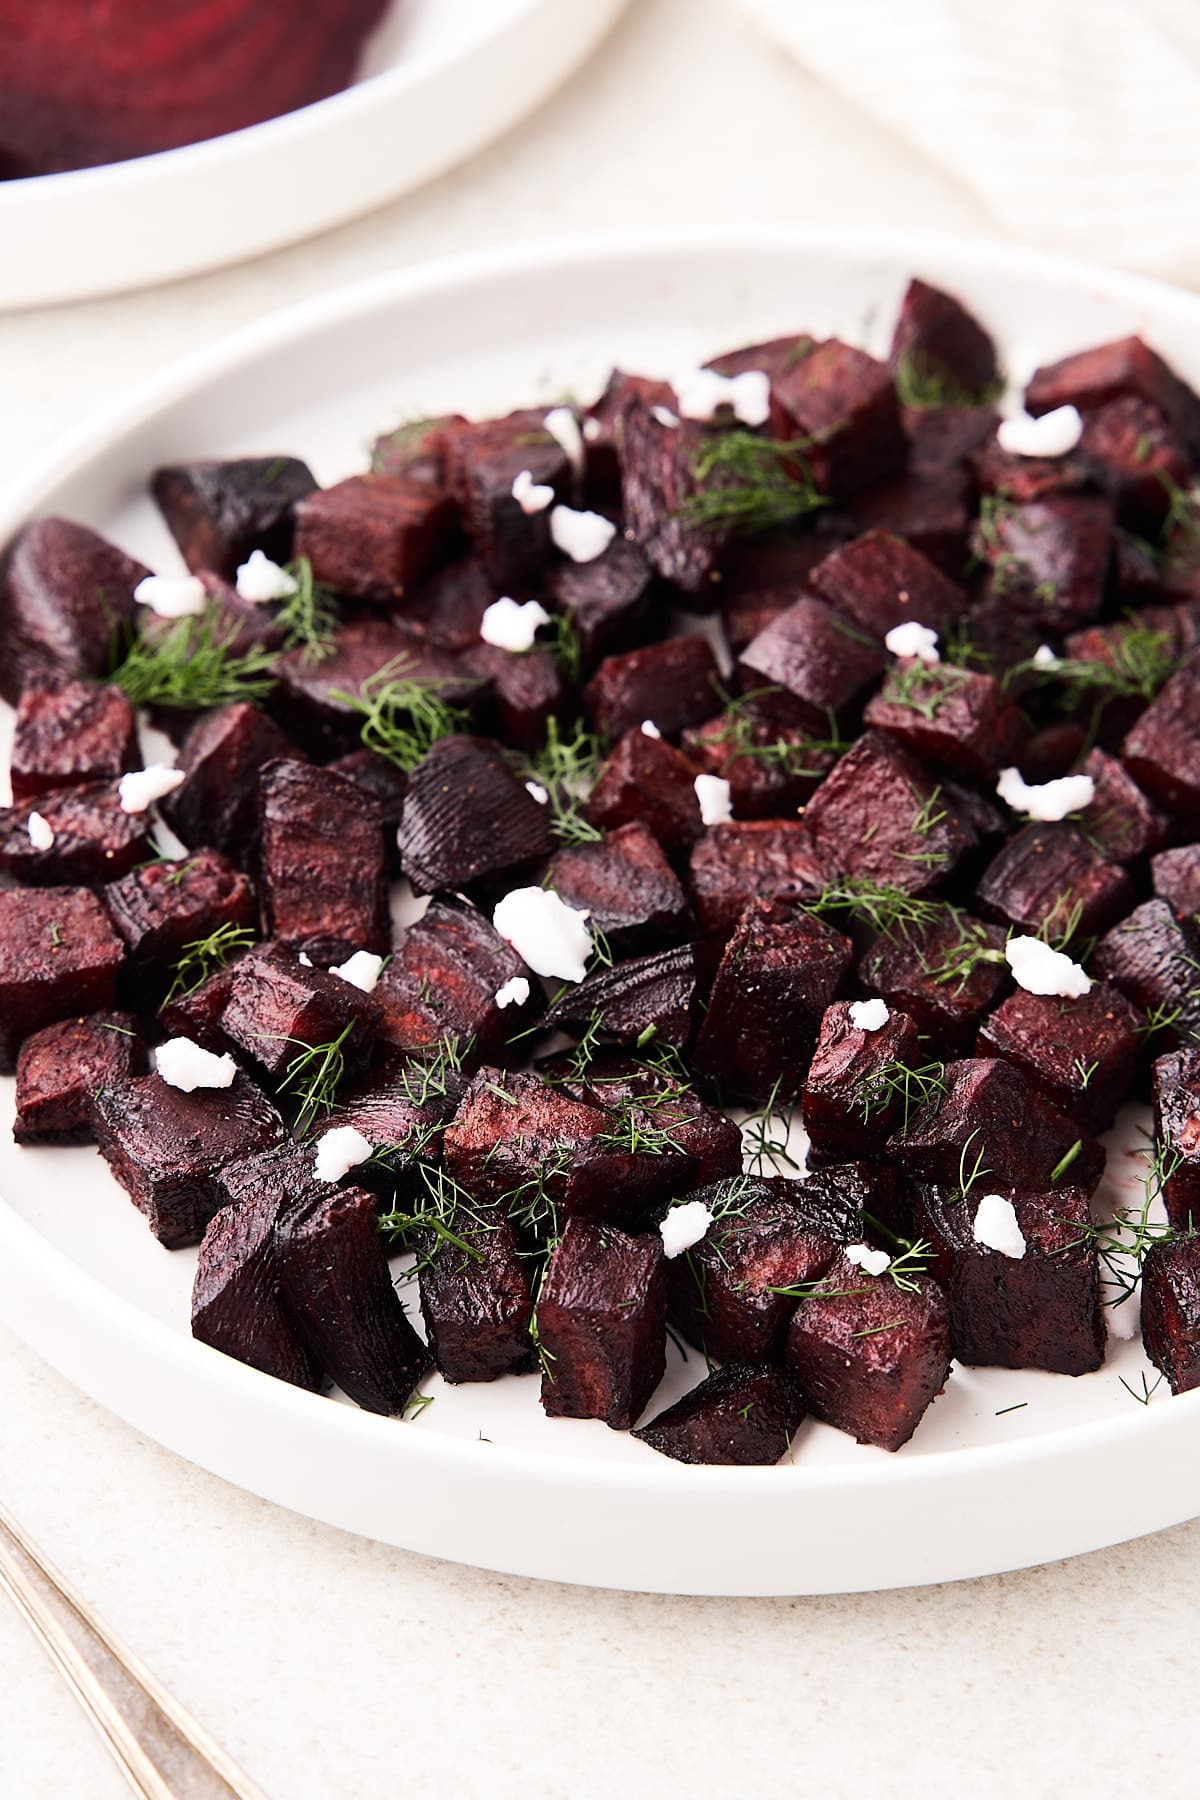 Roasted beet cubes with feta and herbs.